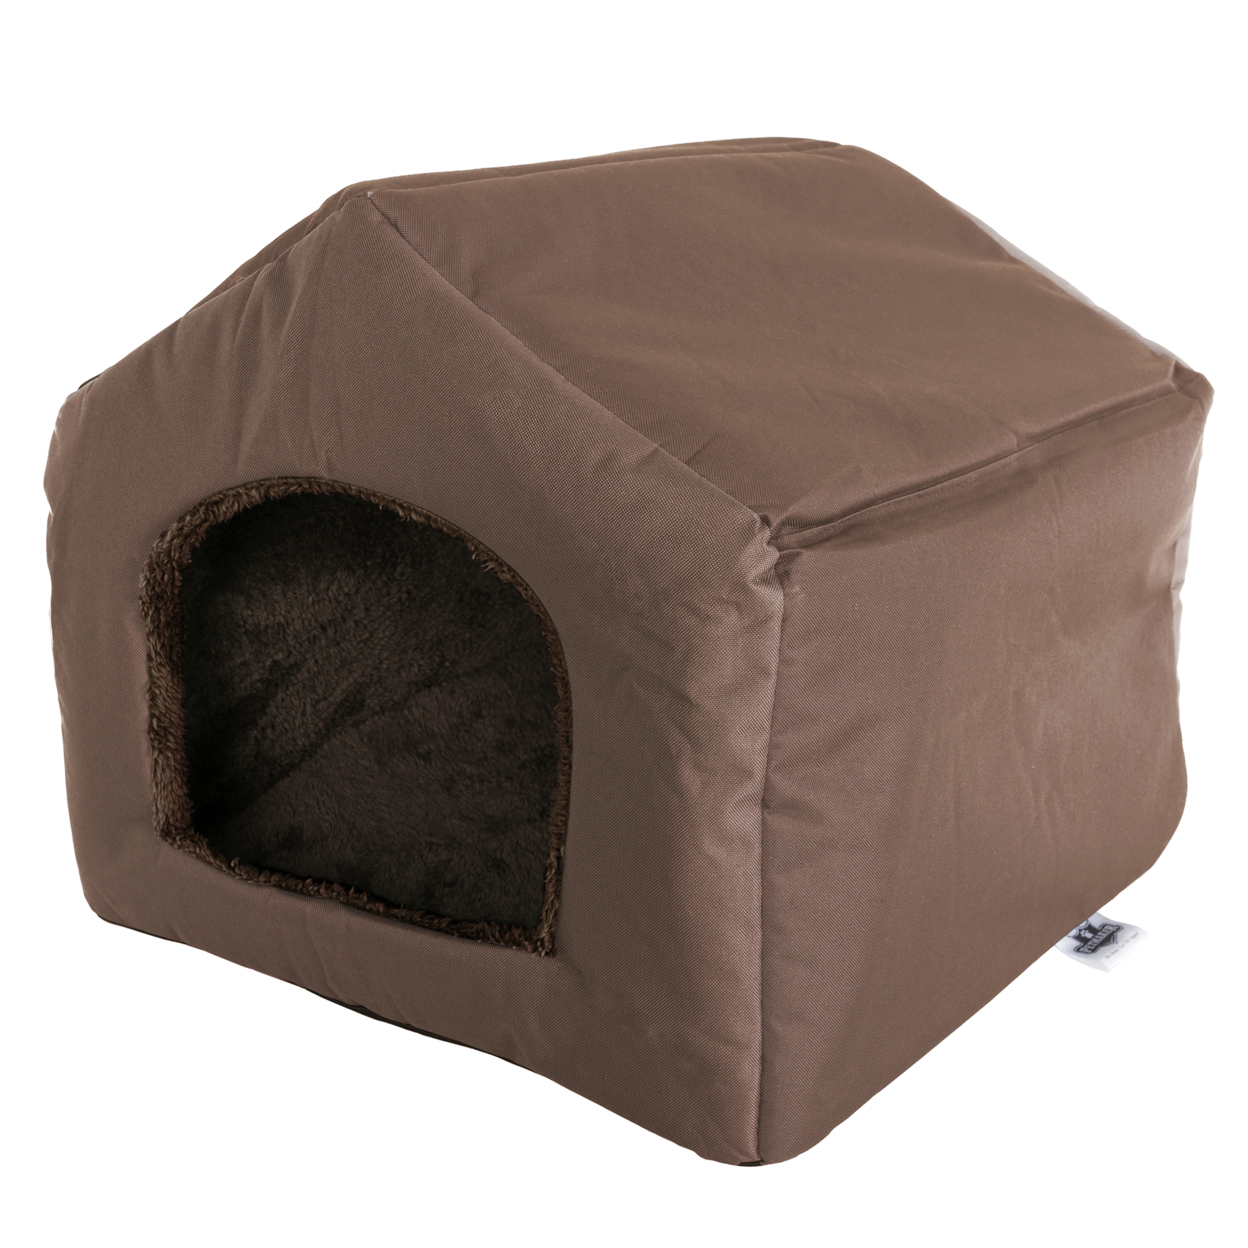 PETMAKER Cozy Cottage House Shaped Pet Bed Brown 19x18.5x17